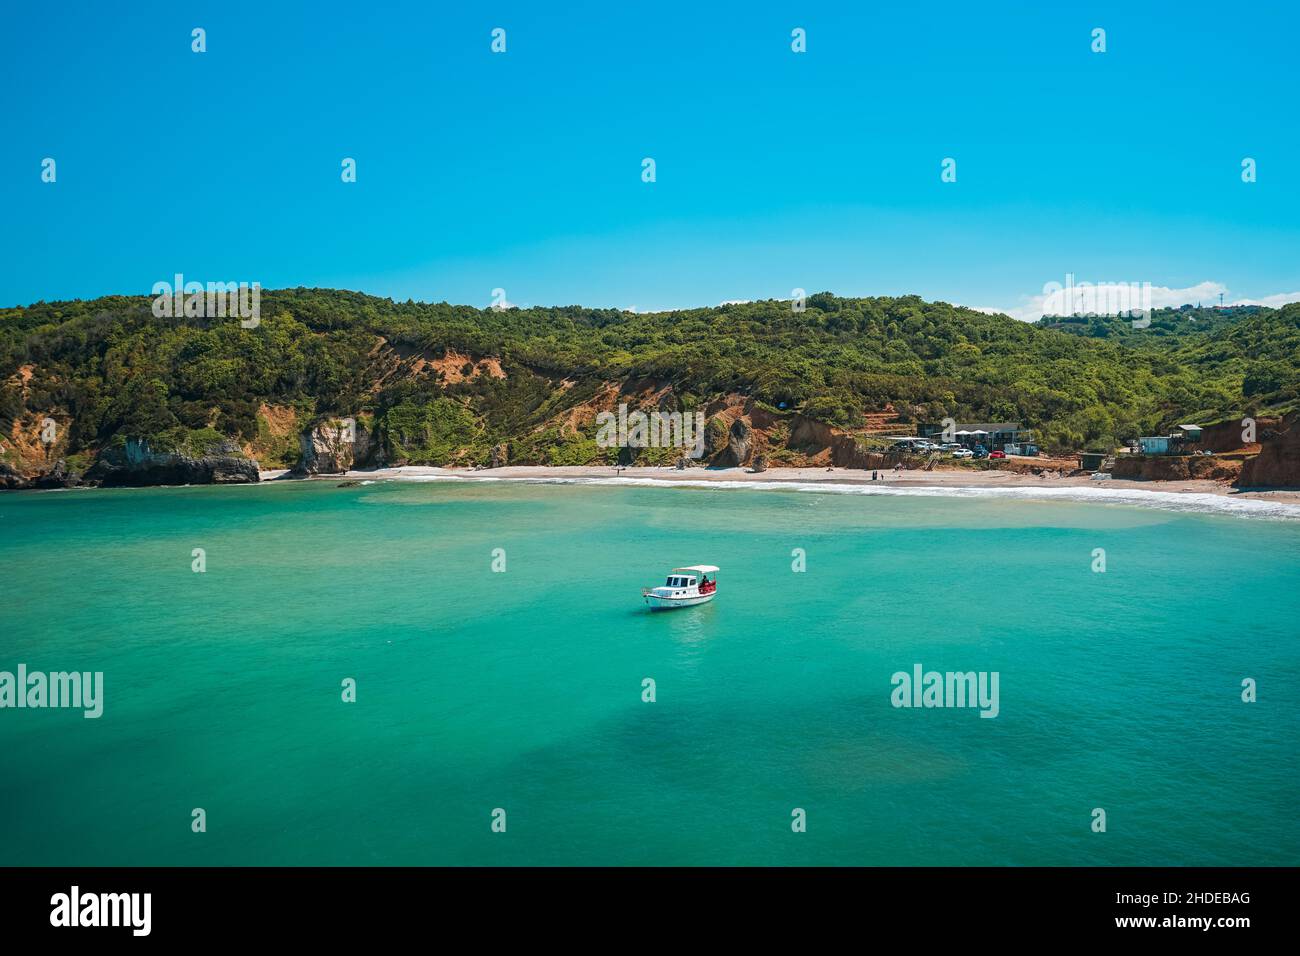 View of Kilimli Beach in Agva. Agva is a populated place and resort destination in the Sile district of Istanbul Province, Turkey. Stock Photo